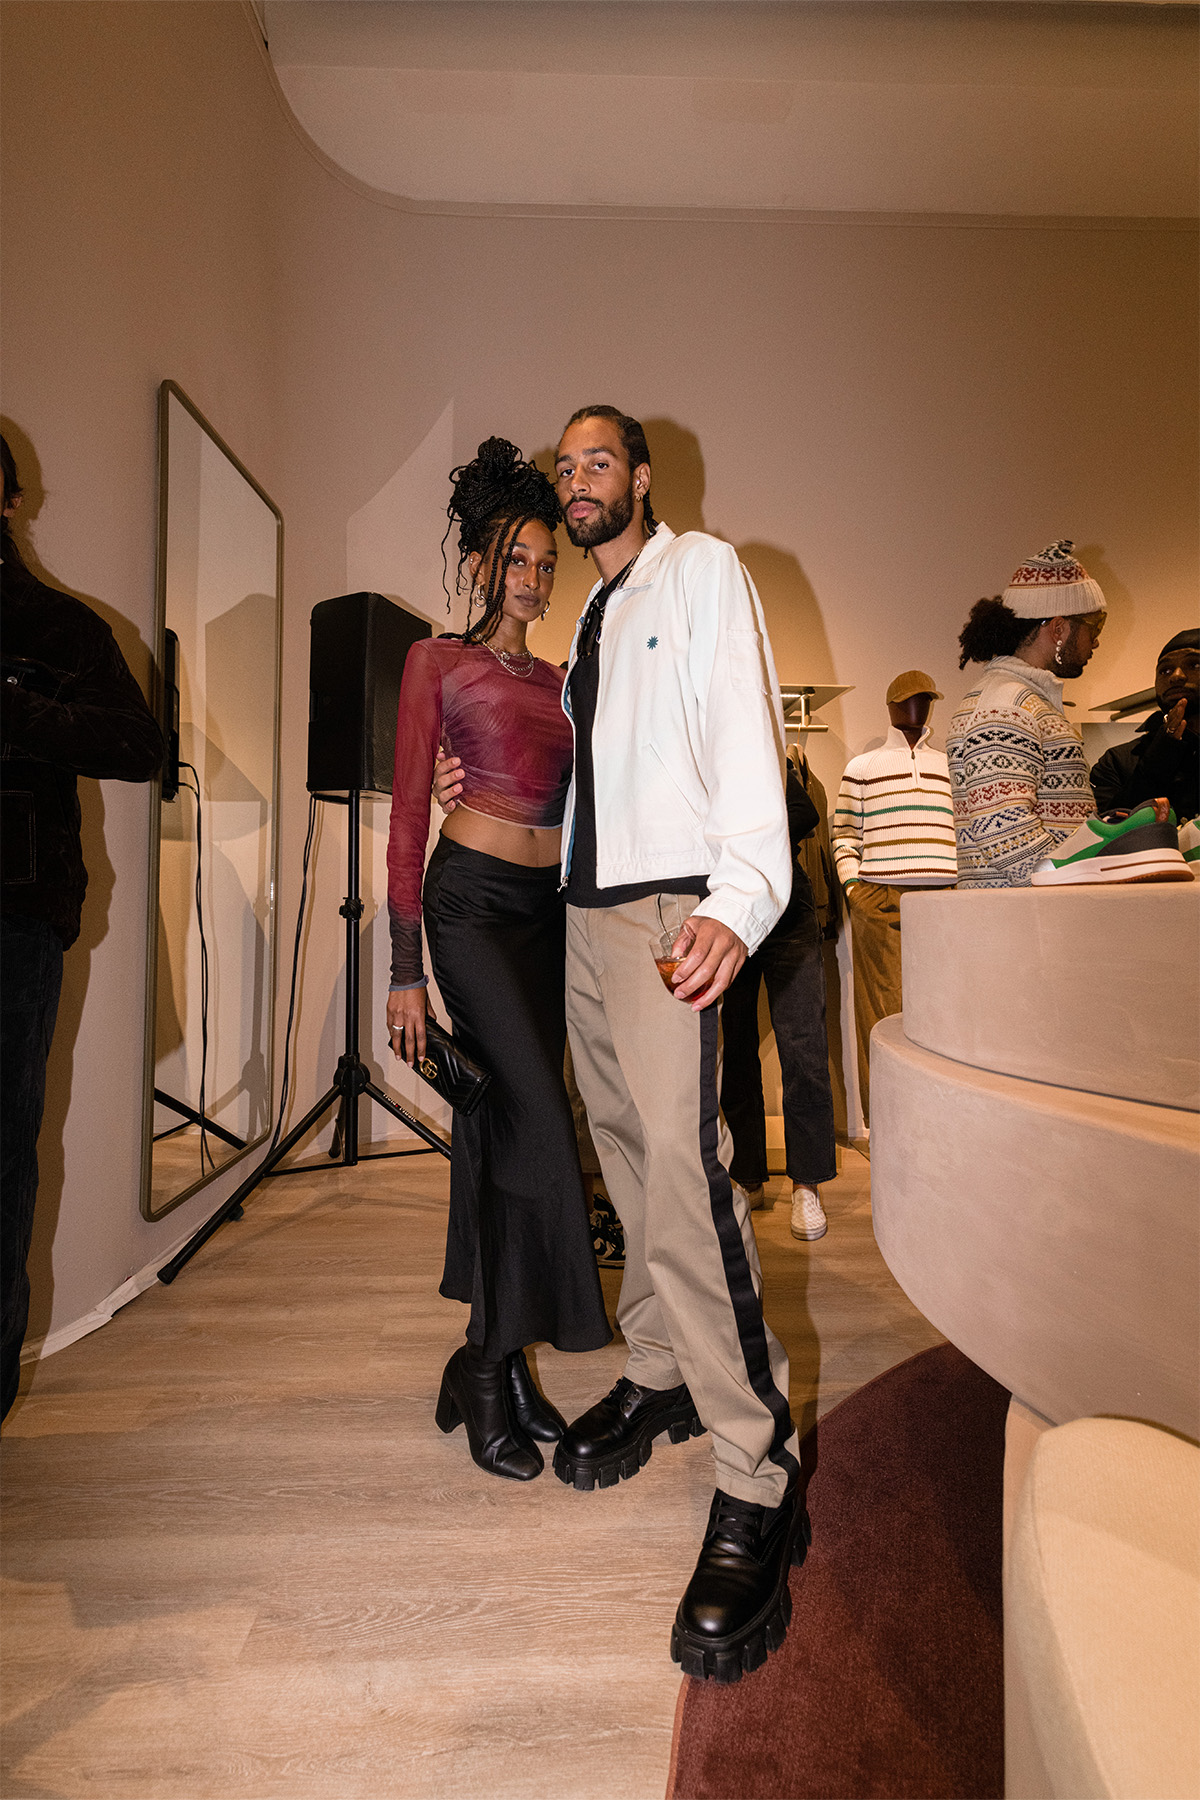 Loro Piana Cocooning Pop-up — RODEO DRIVE